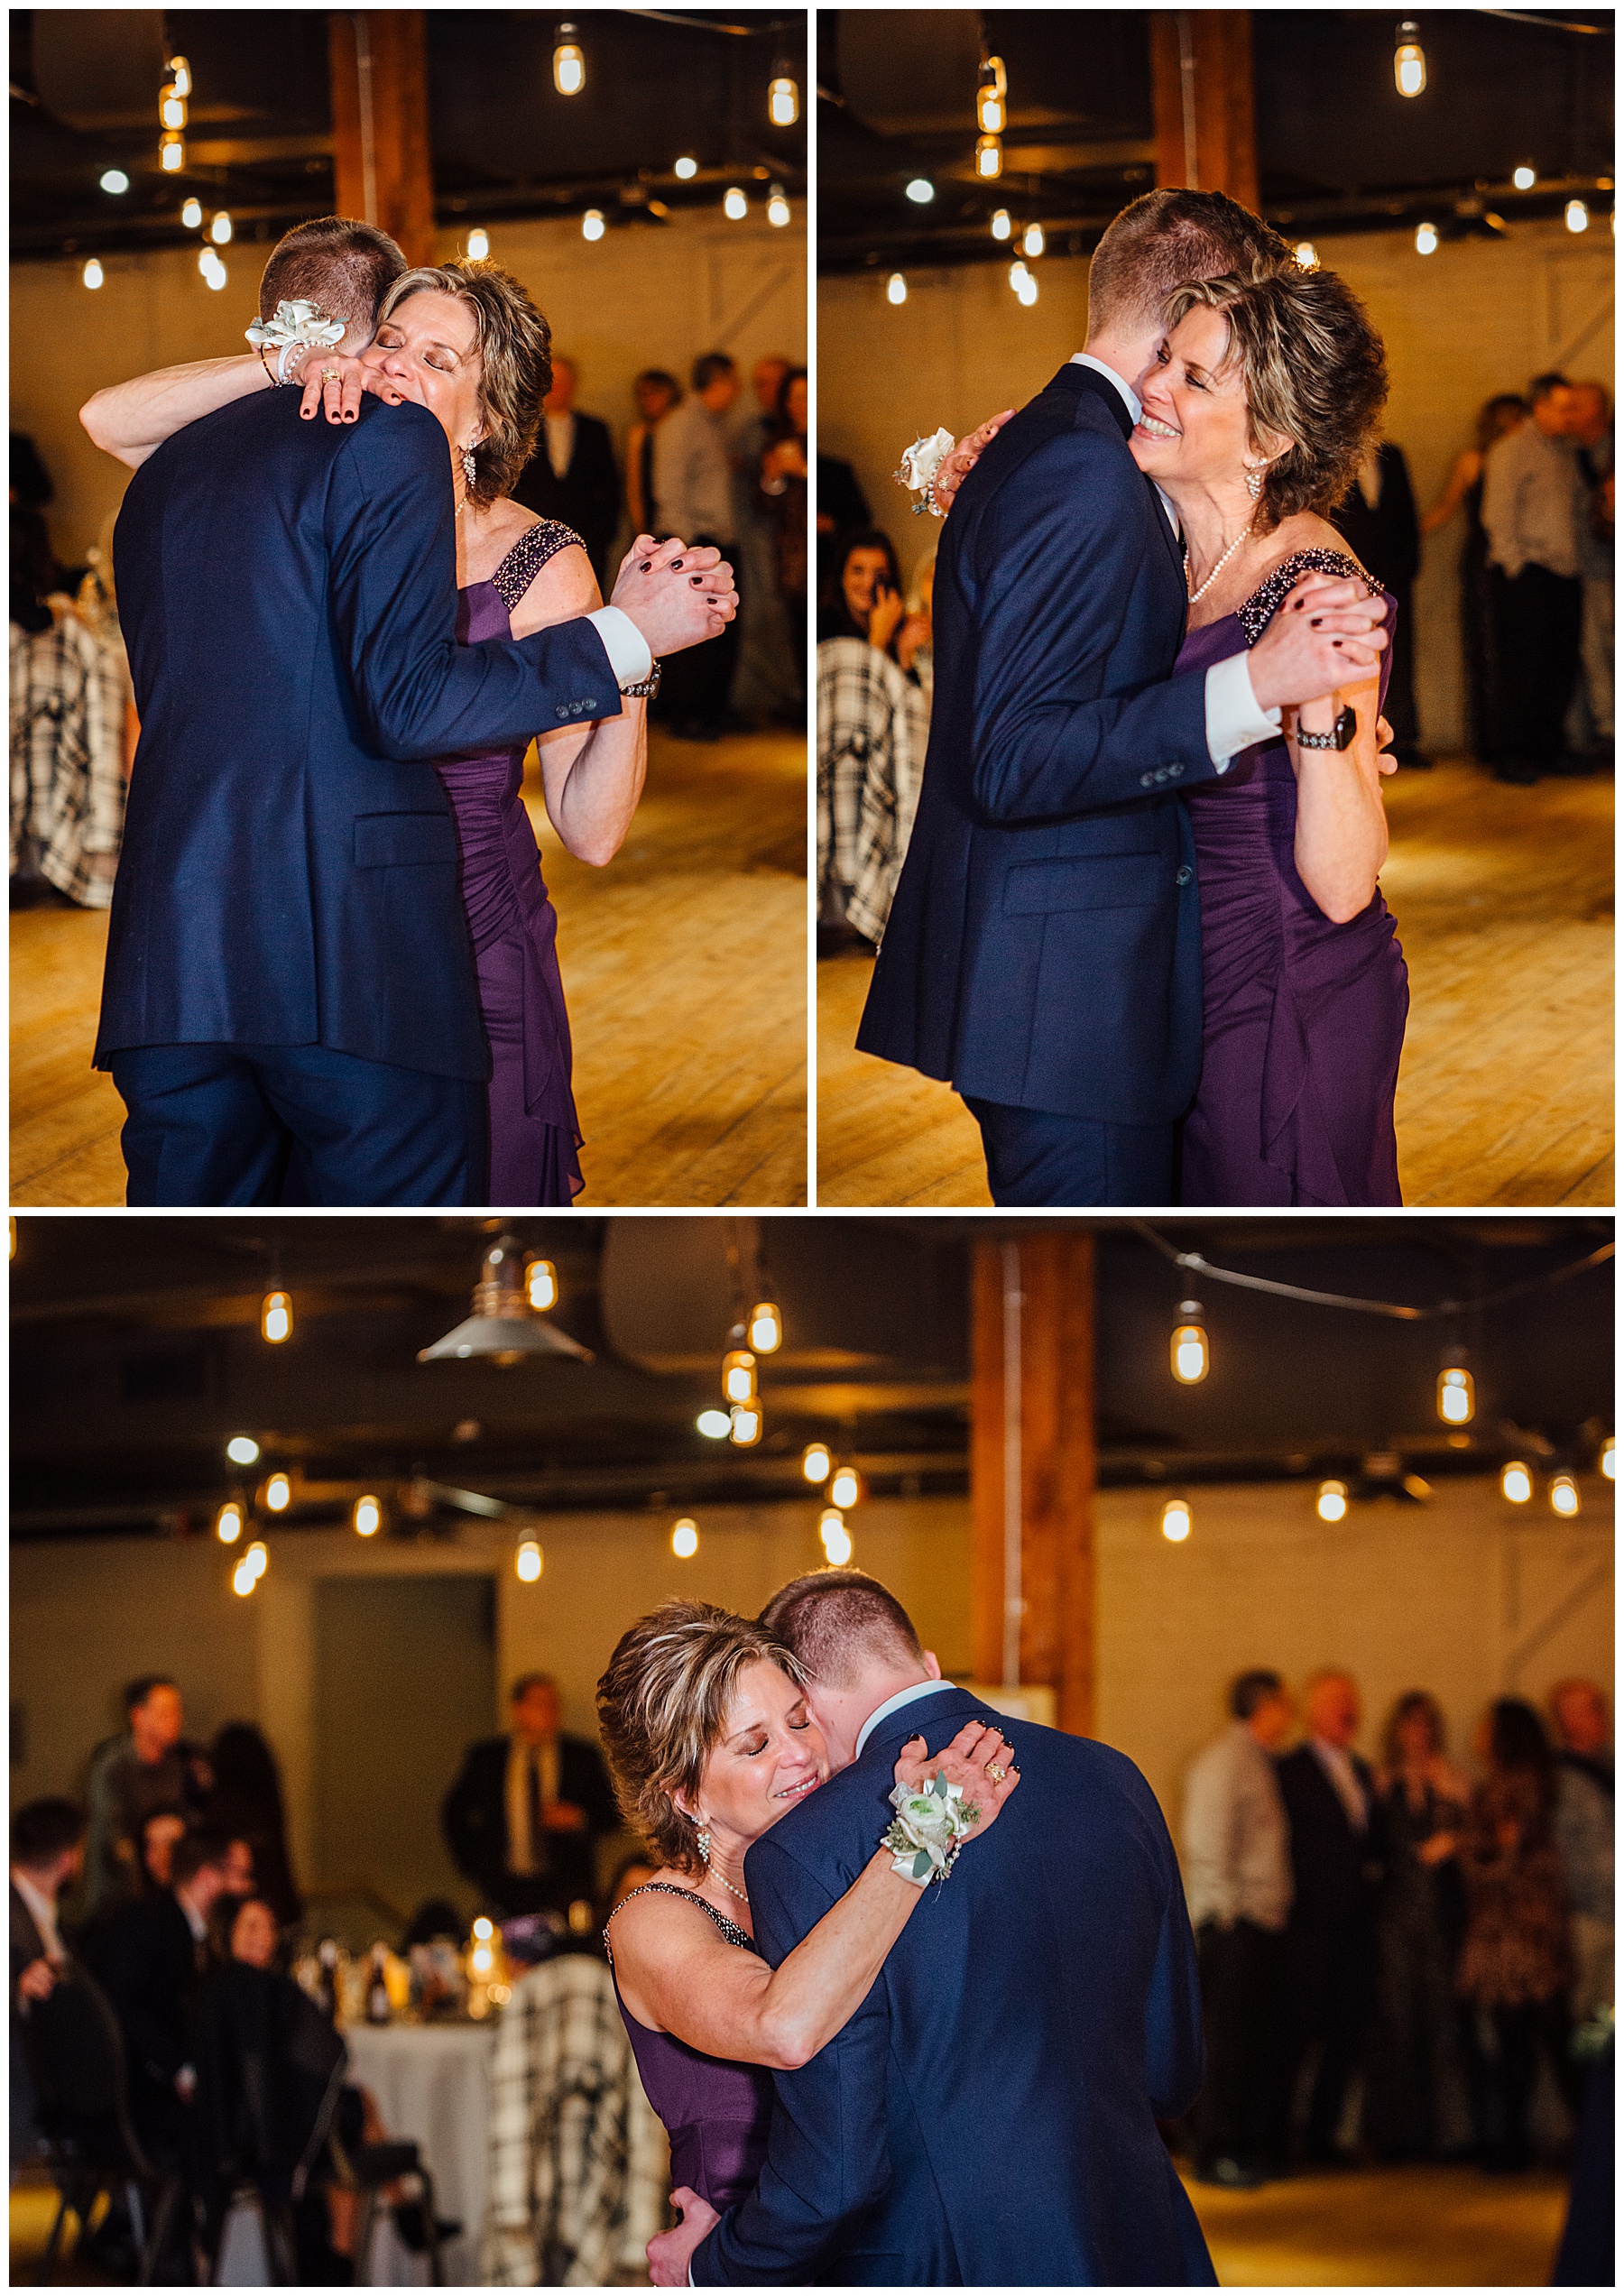 Mother, son dance at Old Mattress factory reception